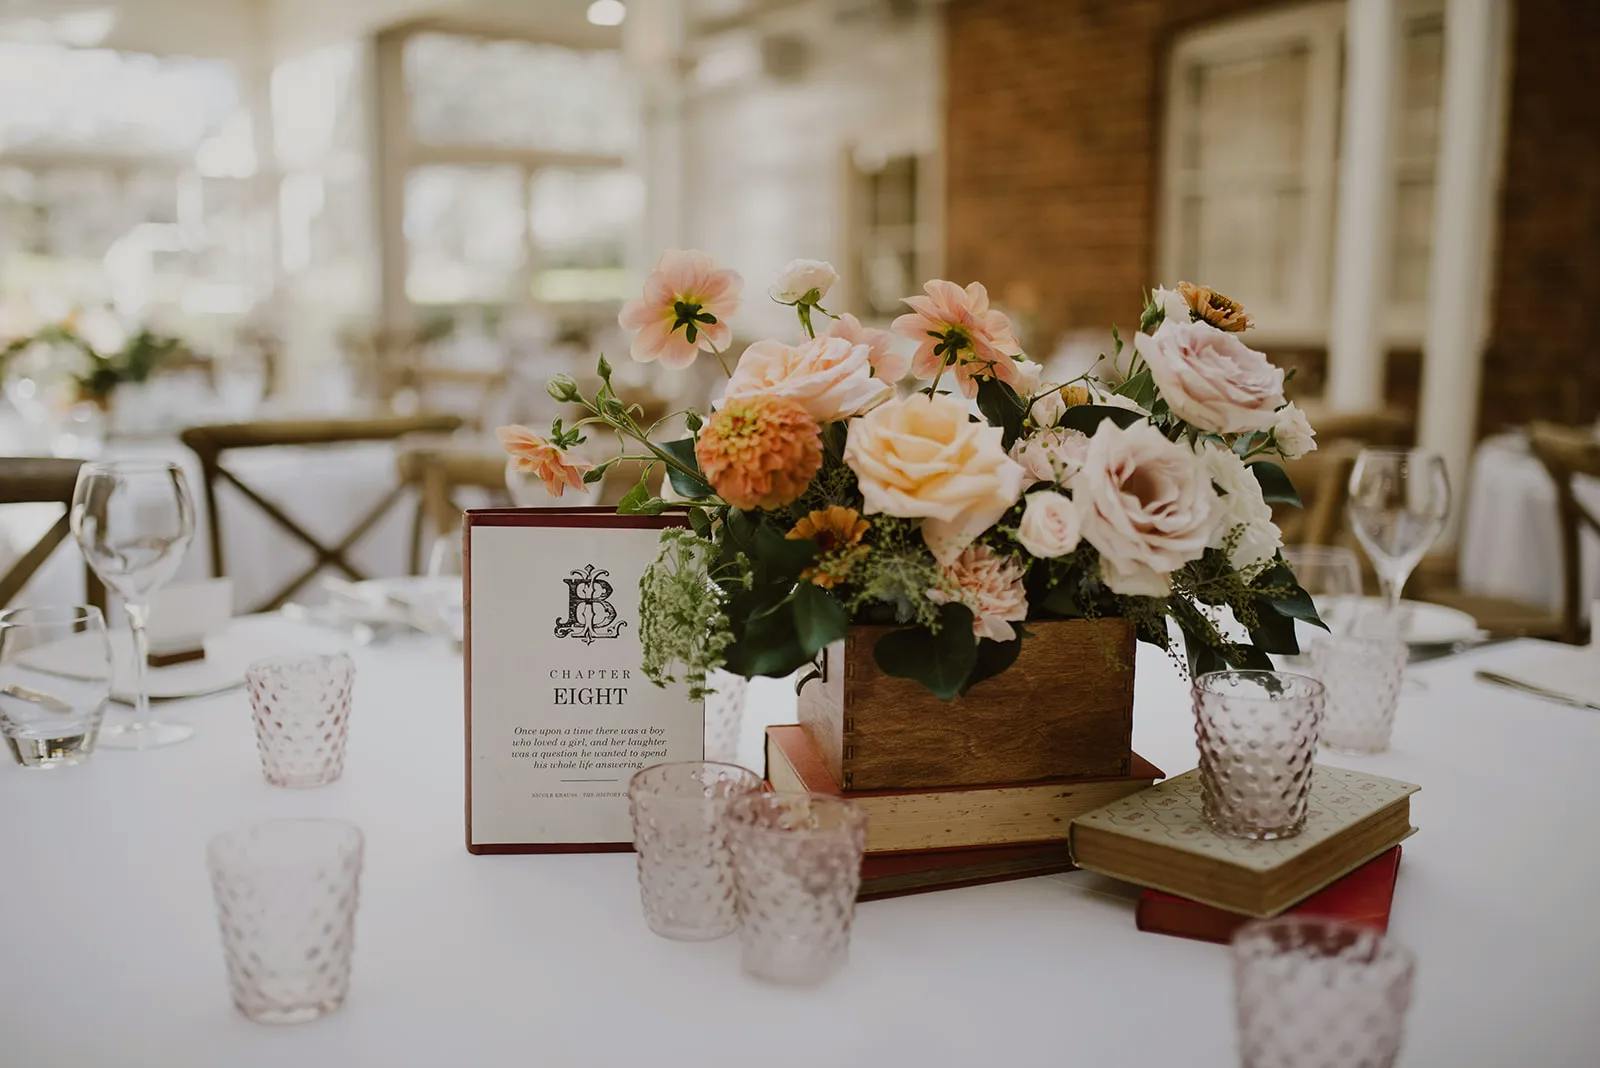 A table is elegantly set for an event, featuring a centerpiece of peach and orange flowers in a rustic box. Next to the arrangement is a standing card with "Chapter Eight" printed on it and some text. The table is adorned with pink glassware and vintage books.